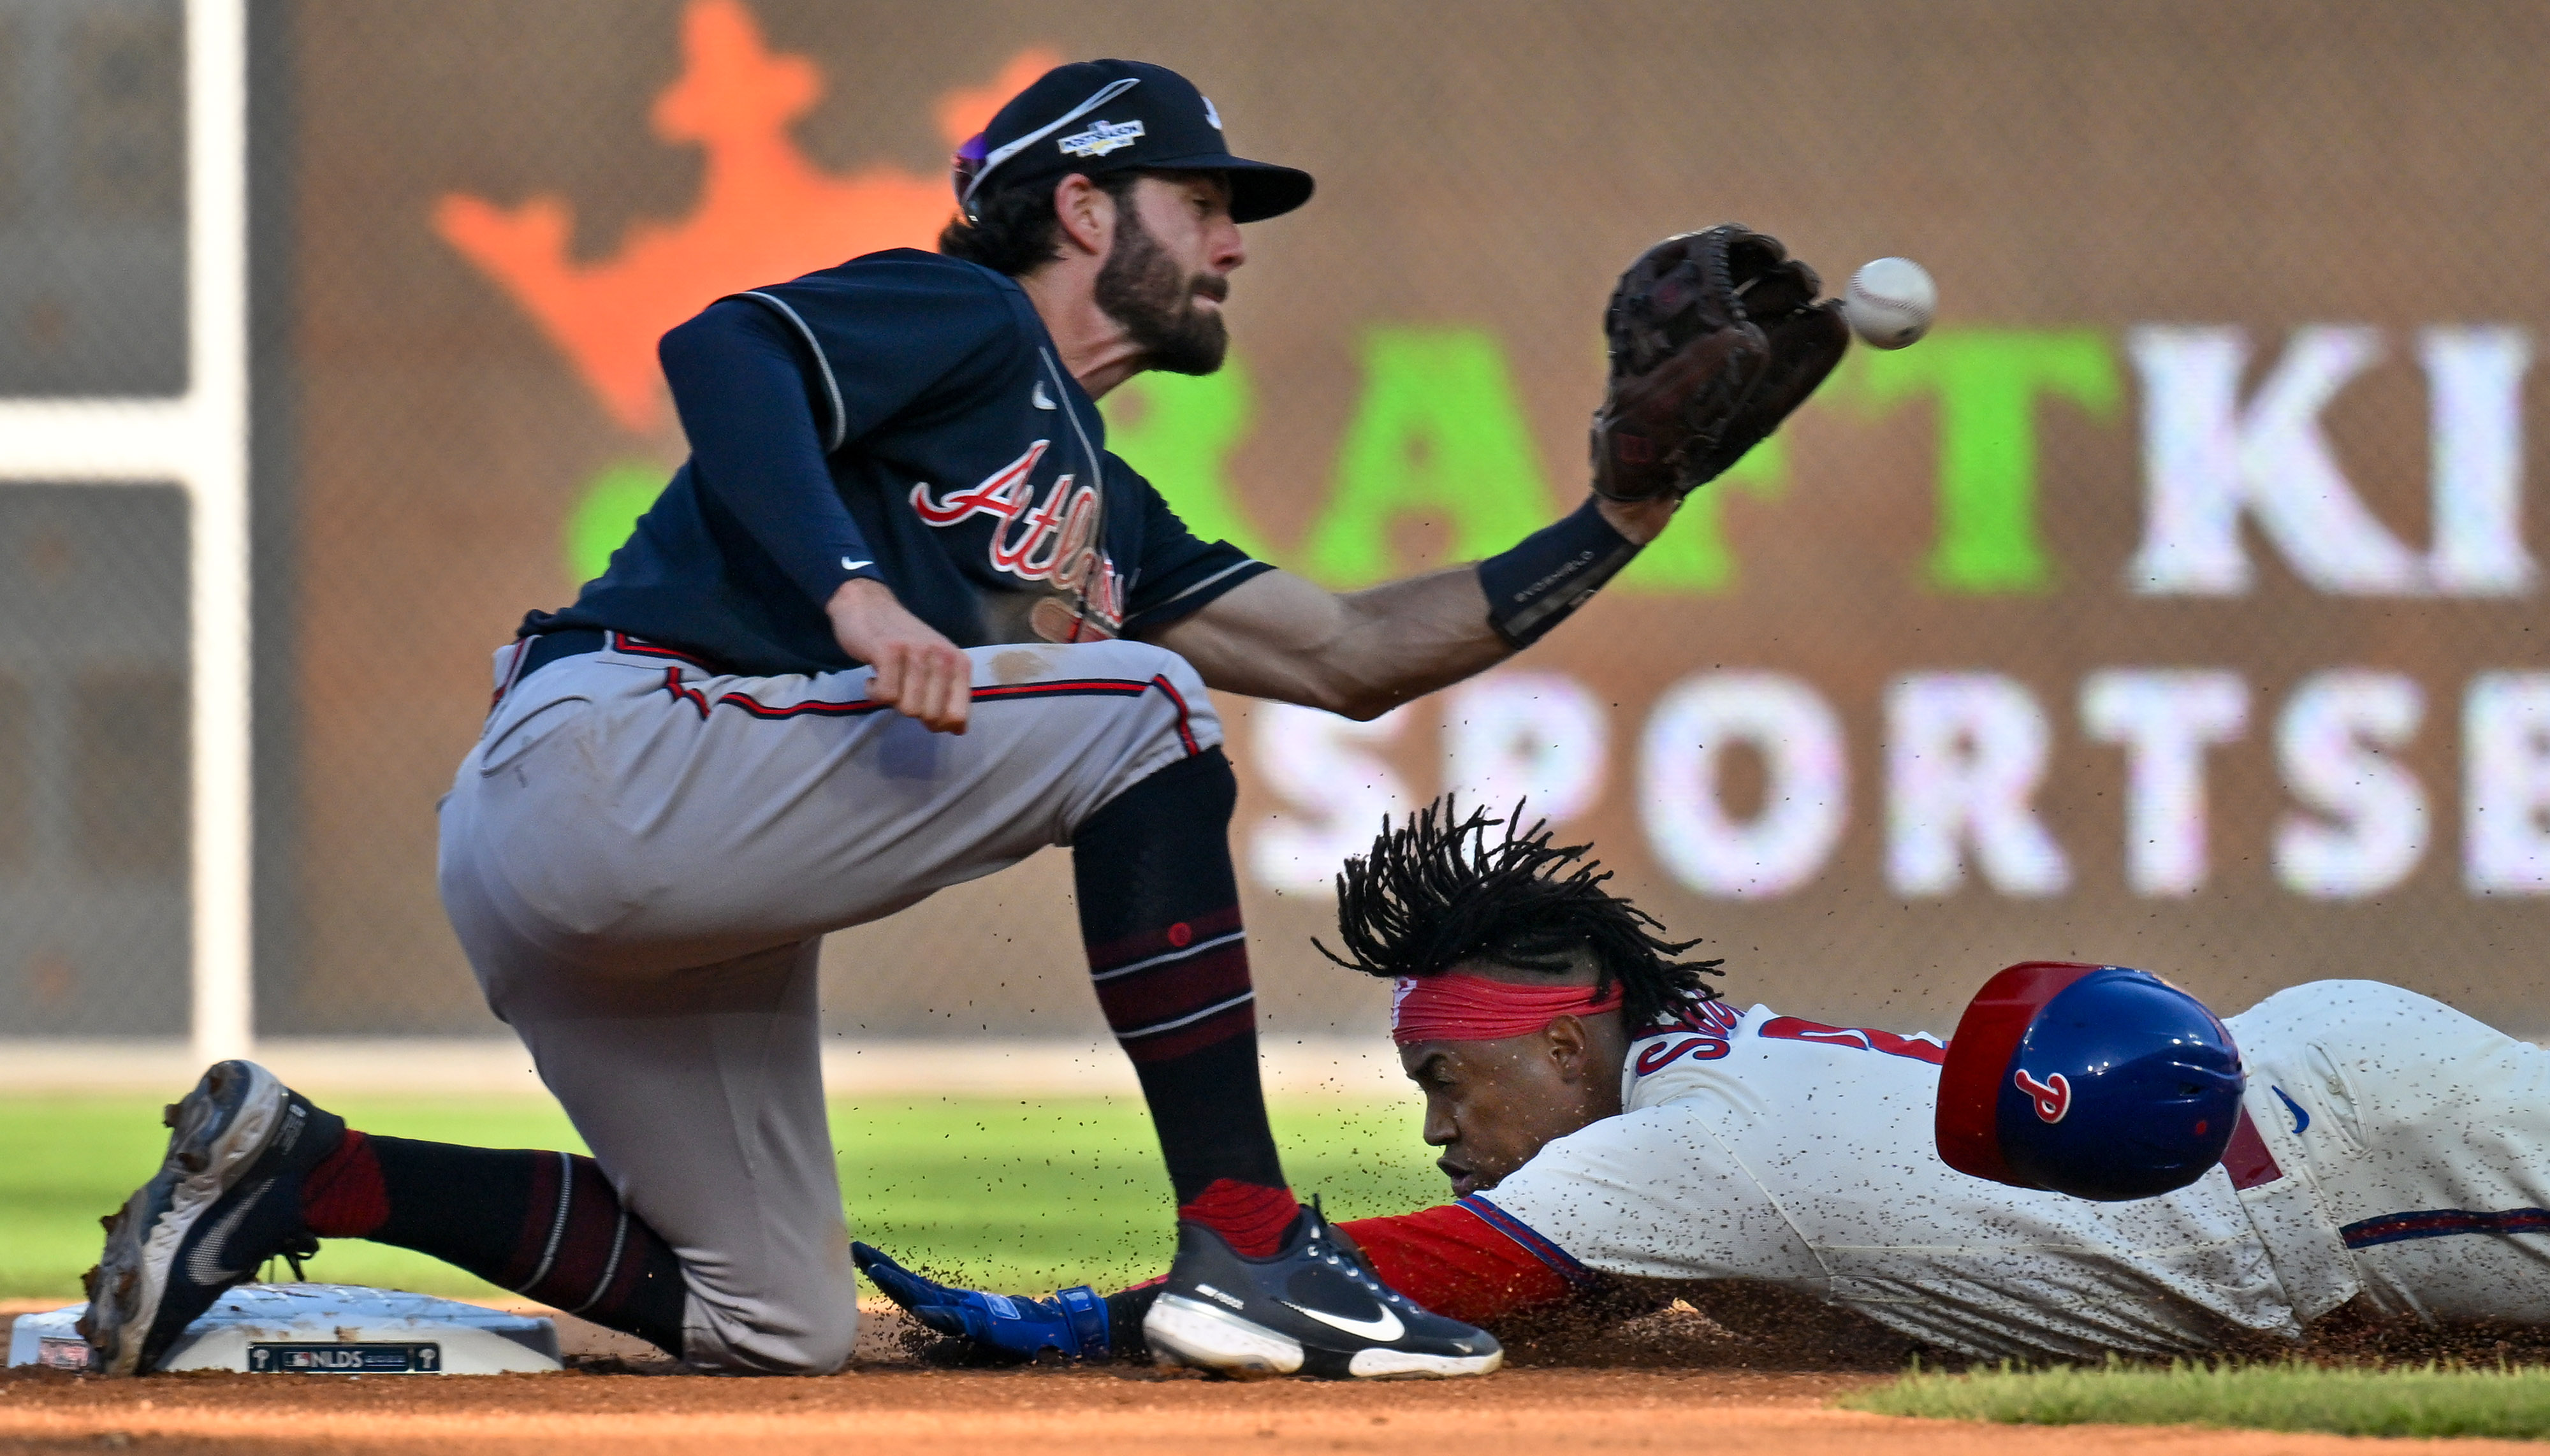 Braves News: Dansby is changing numbers - Battery Power